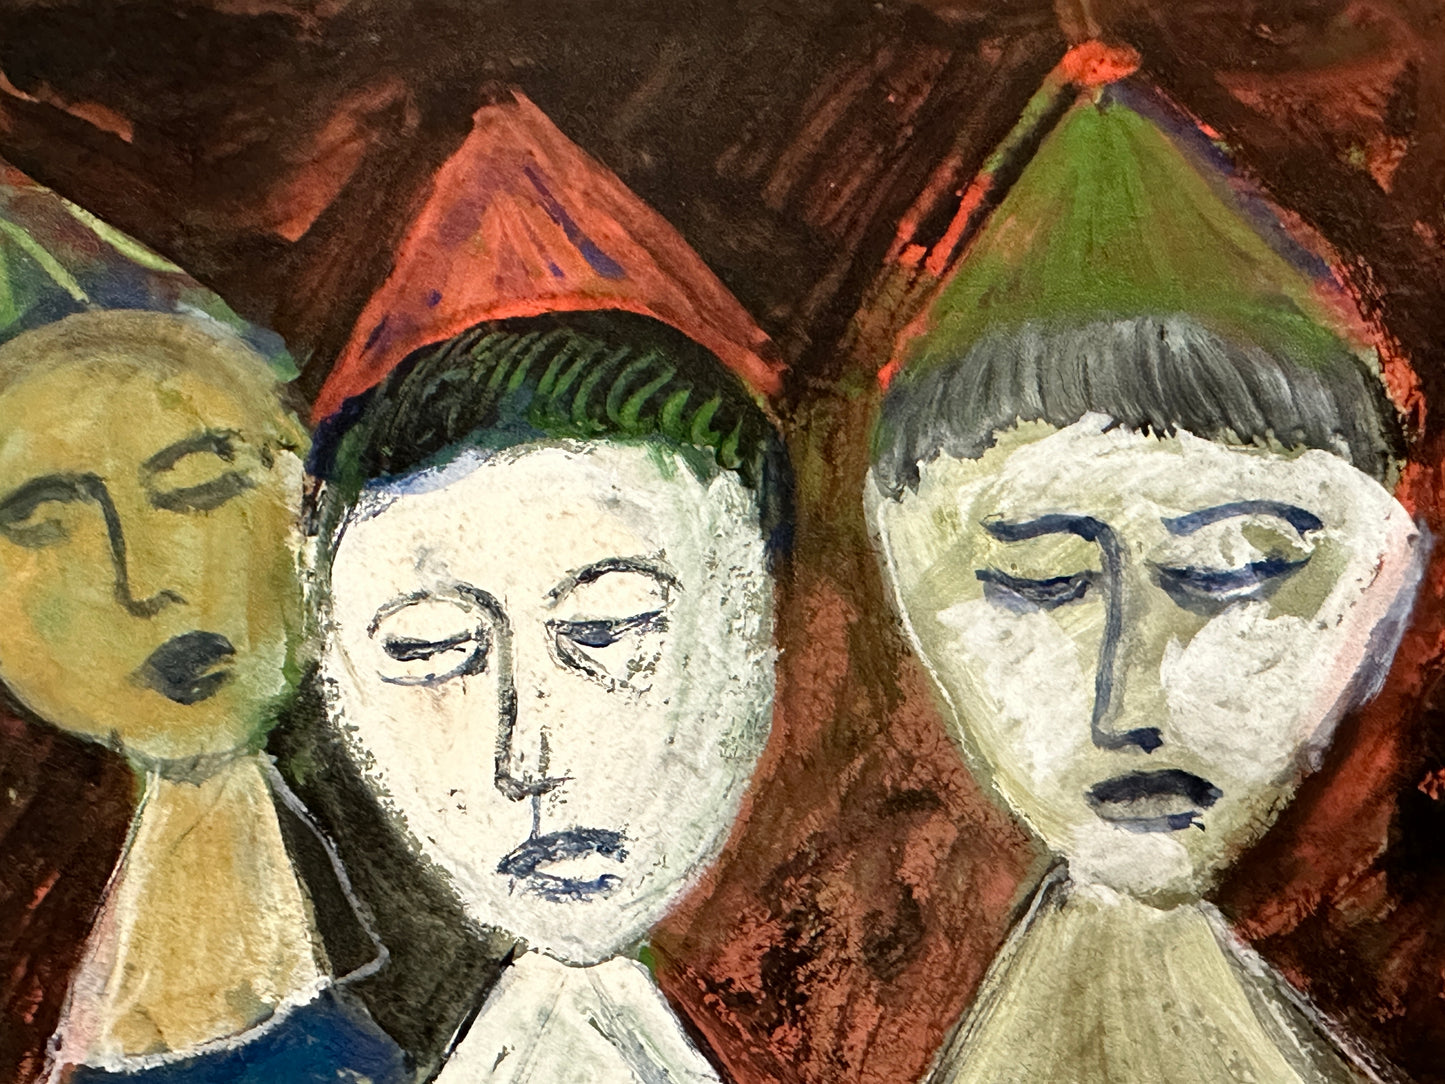 Gene Charlton Oil Painting: 3 Figures in Cone Hats